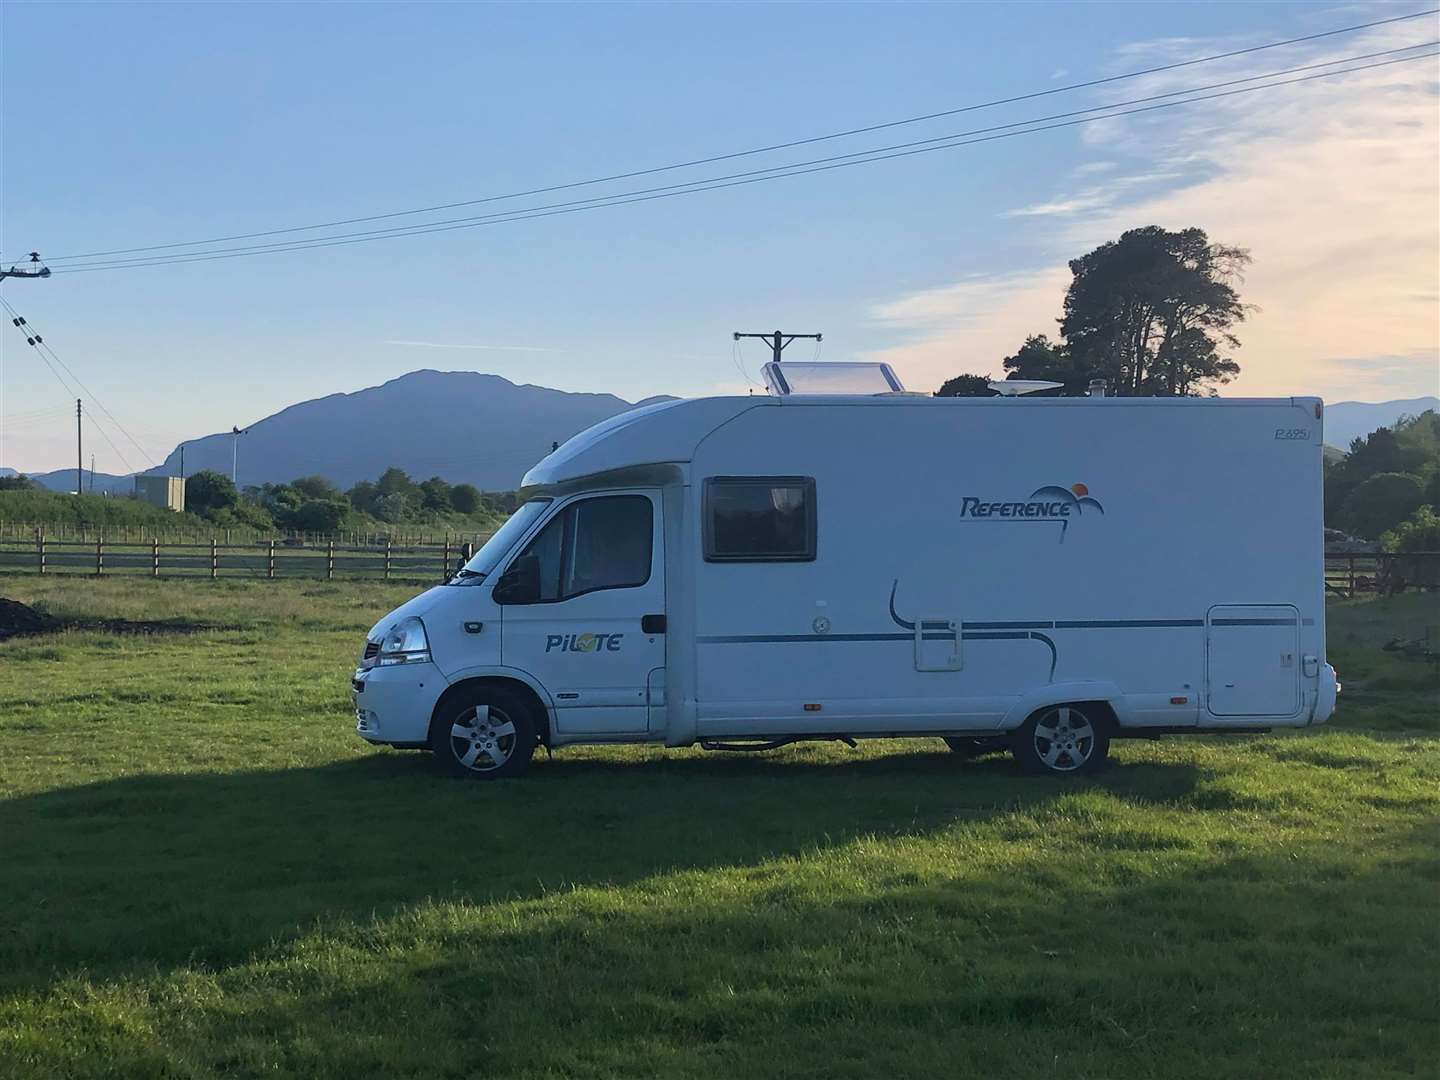 Motorhome from home at Kingussie as the aire takes shape this week